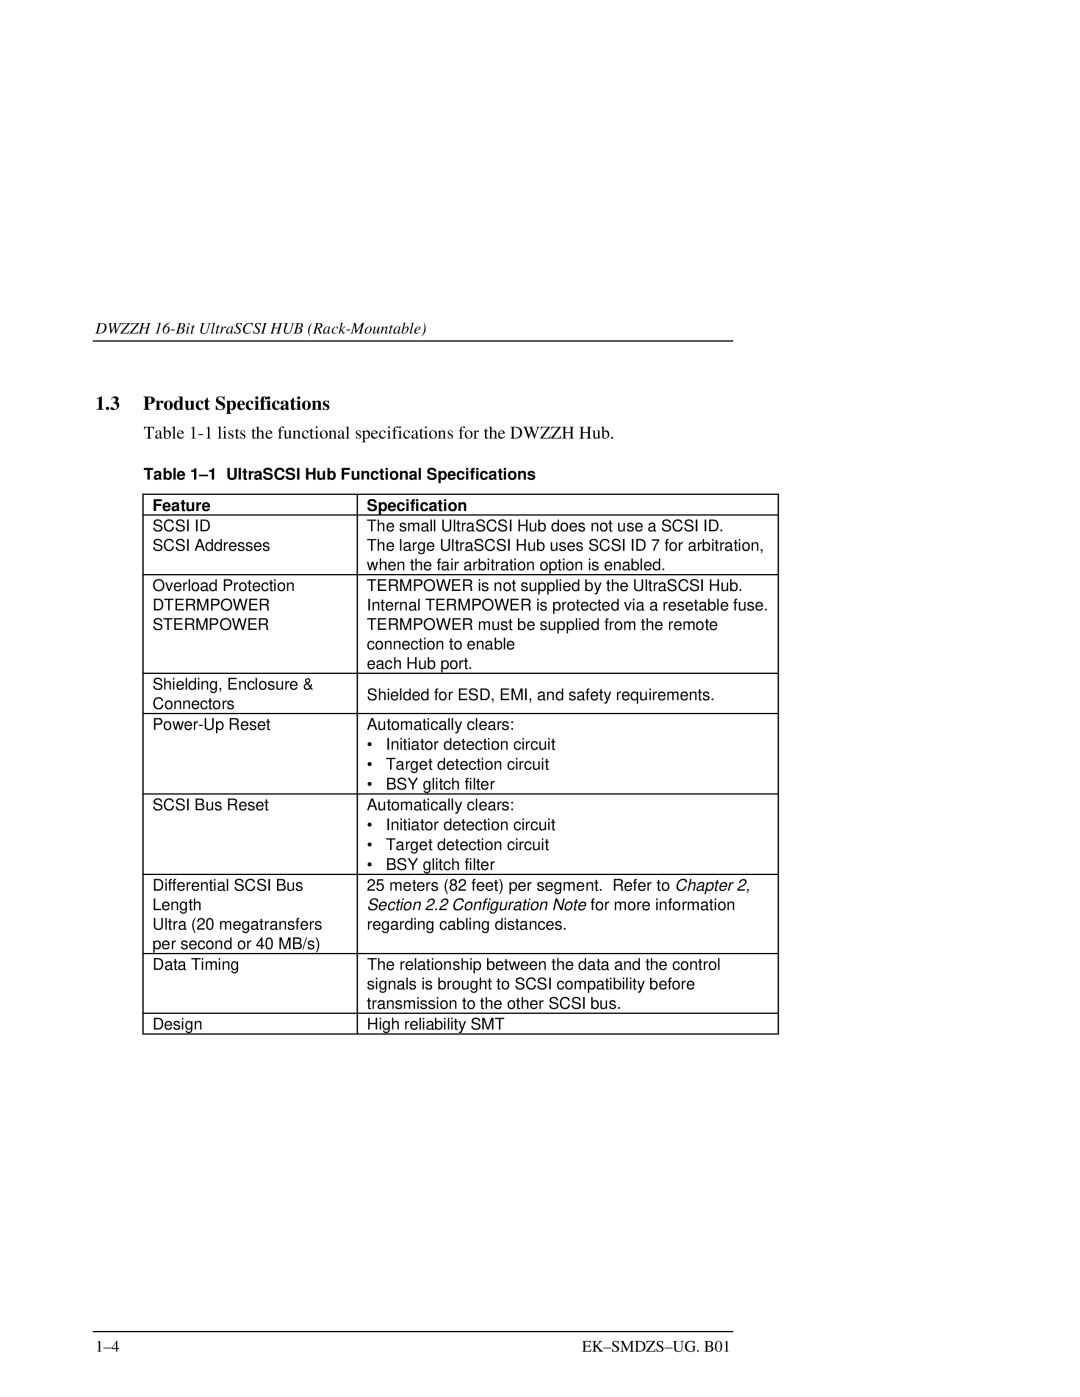 Compaq S5 manual Product Specifications, Lists the functional specifications for the Dwzzh Hub 